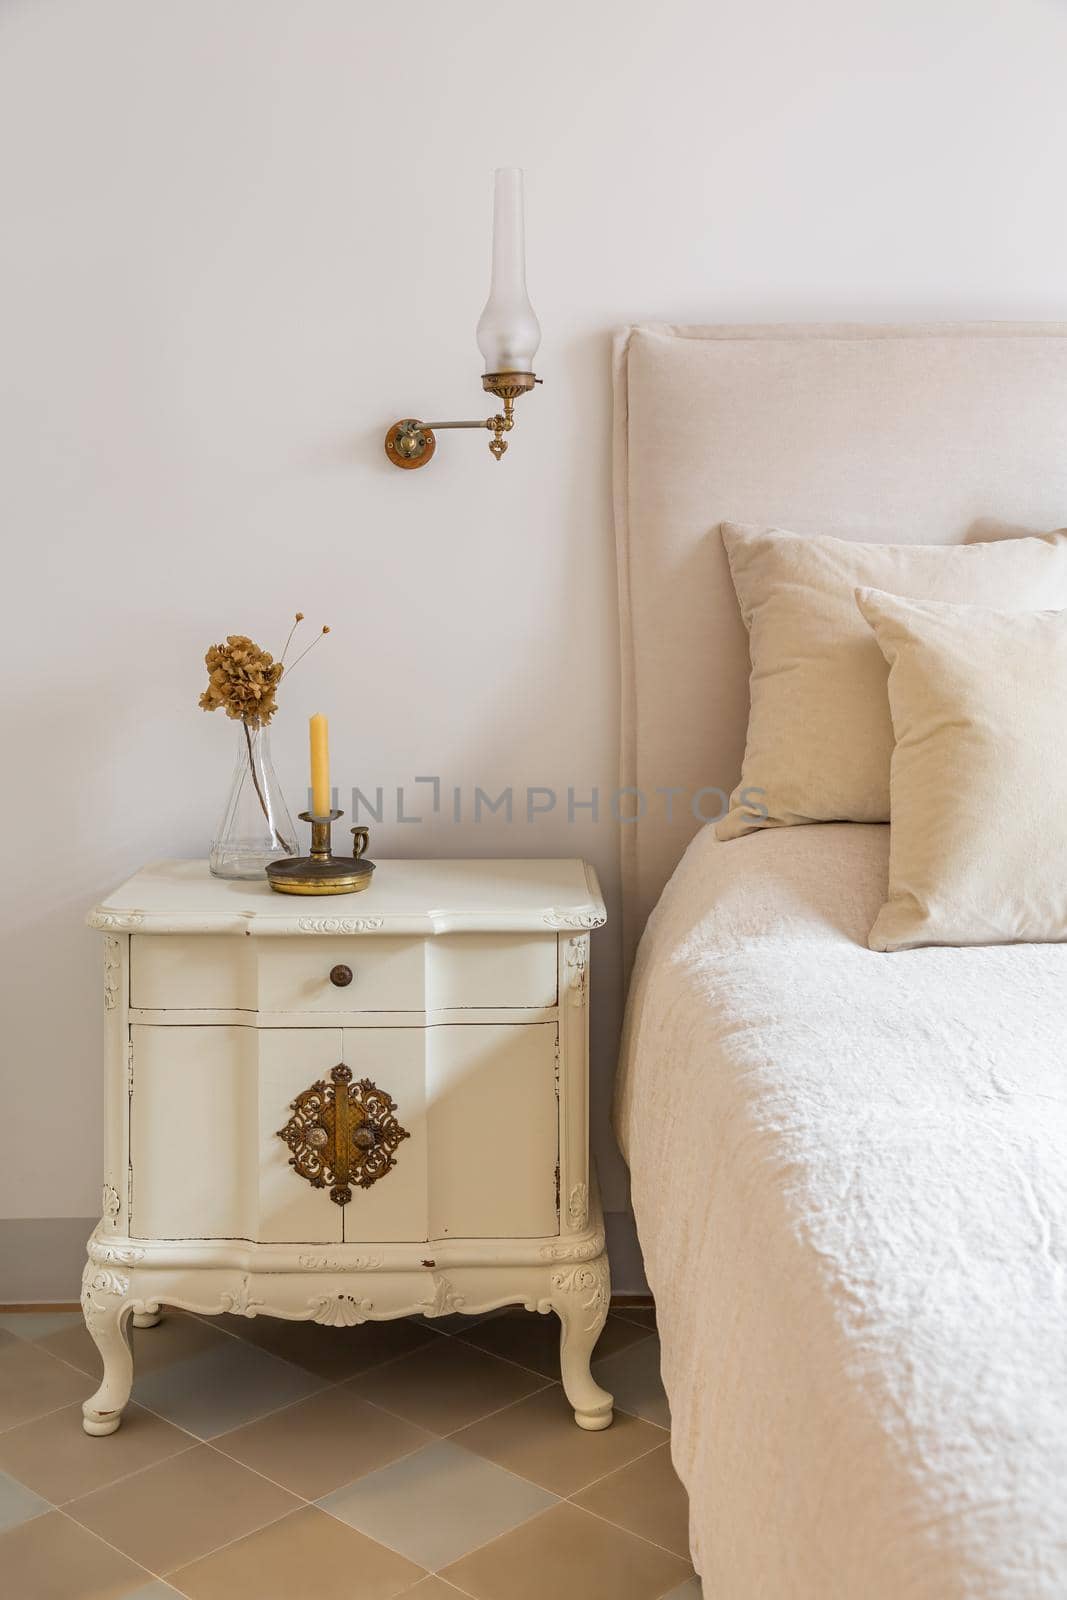 Interior of cozy house in retro style. Classic bedroom with candle and flowers on wooden bedside table near comfortable bed